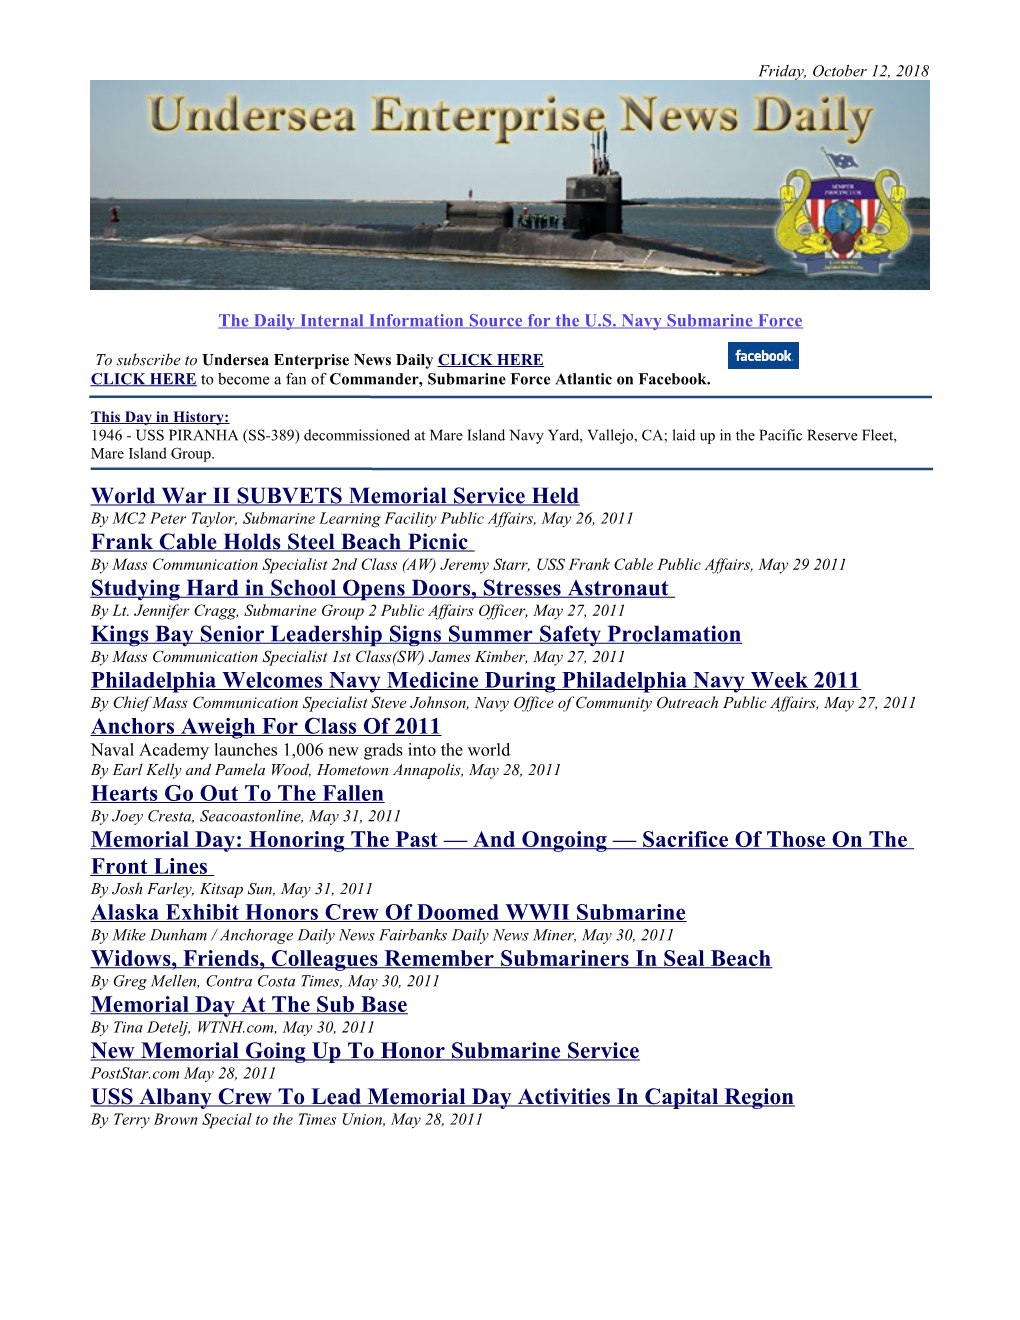 The Daily Internal Information Source for the U.S. Navy Submarine Force